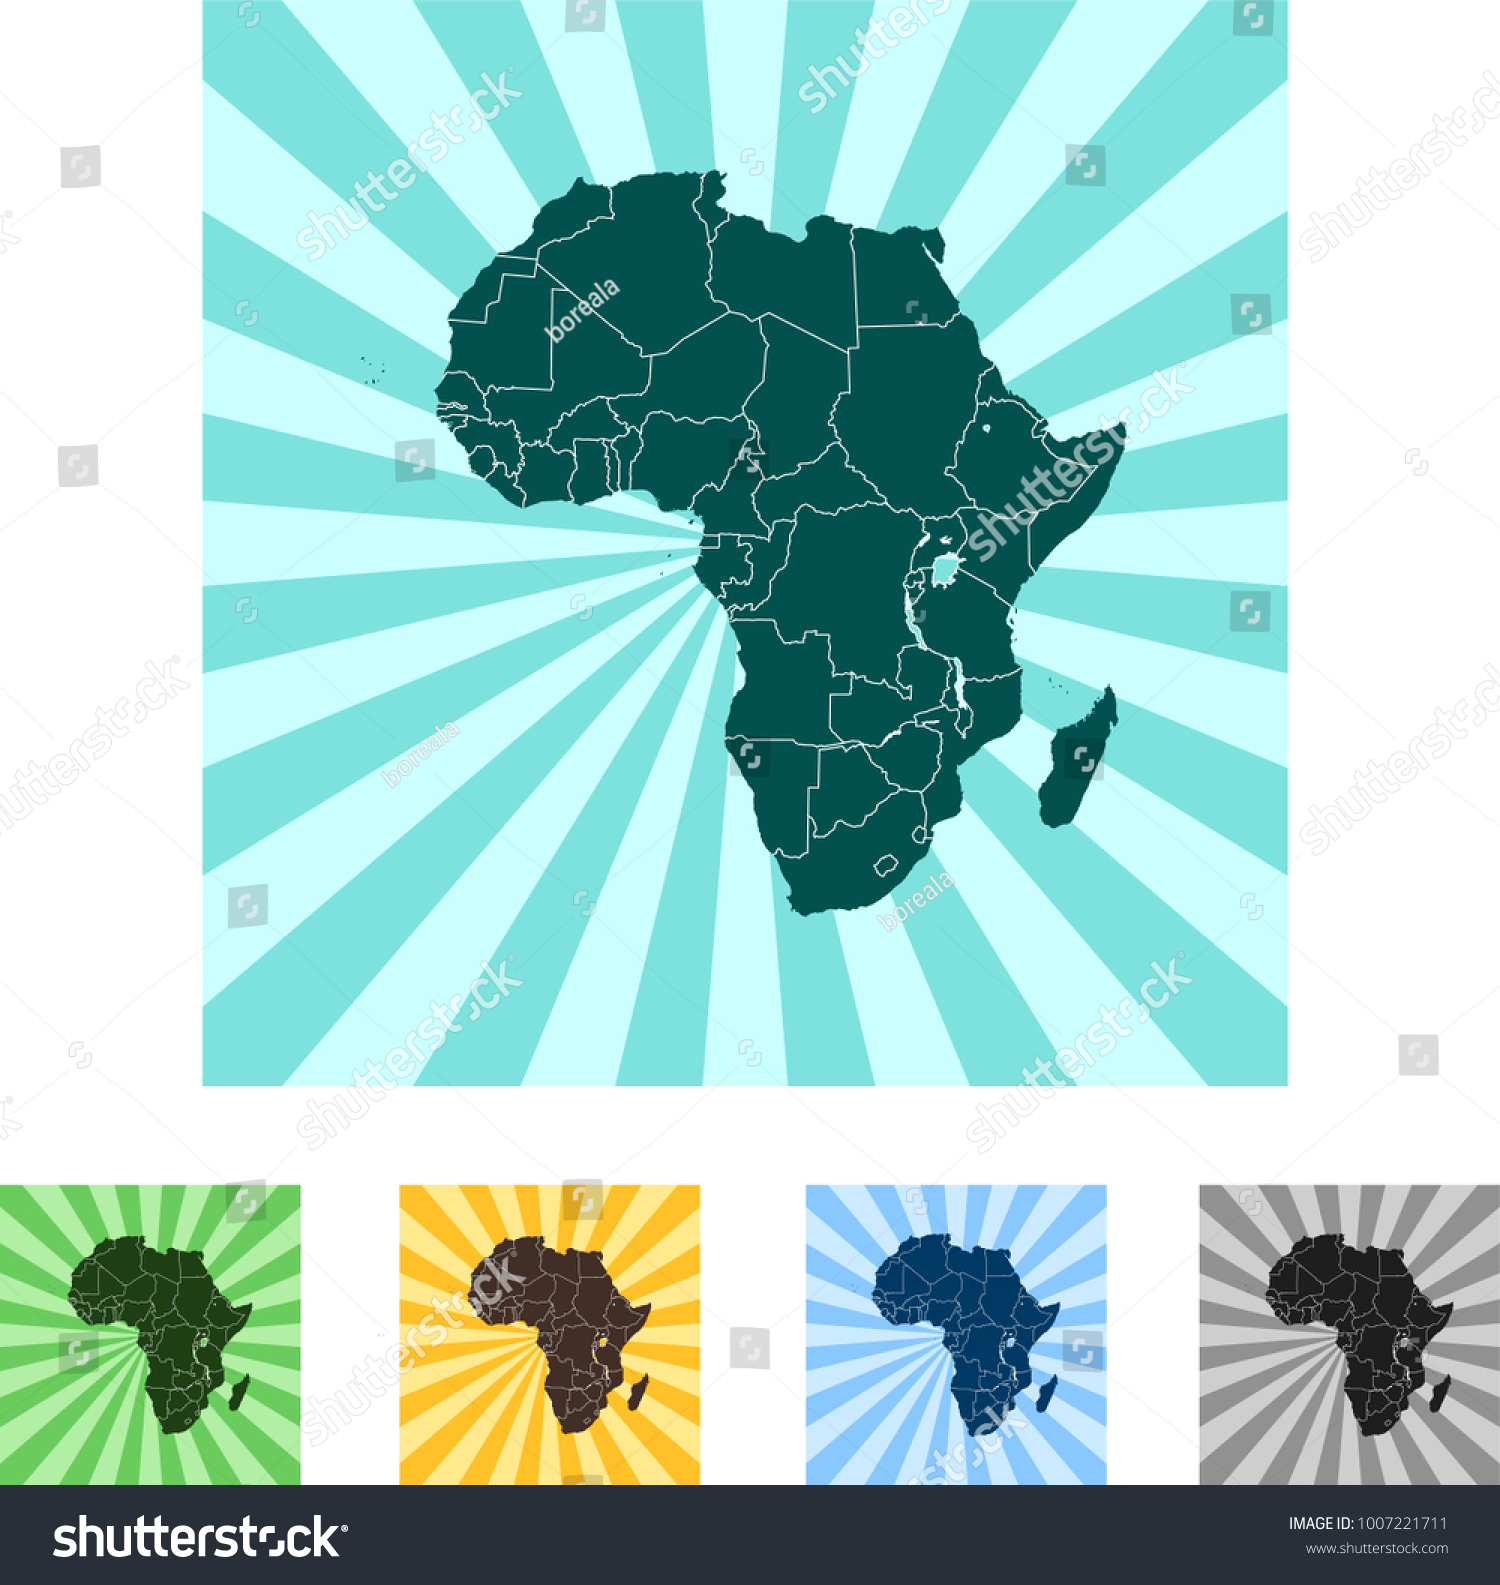 Map Of Africa Royalty Free Stock Vector 1007221711 8501